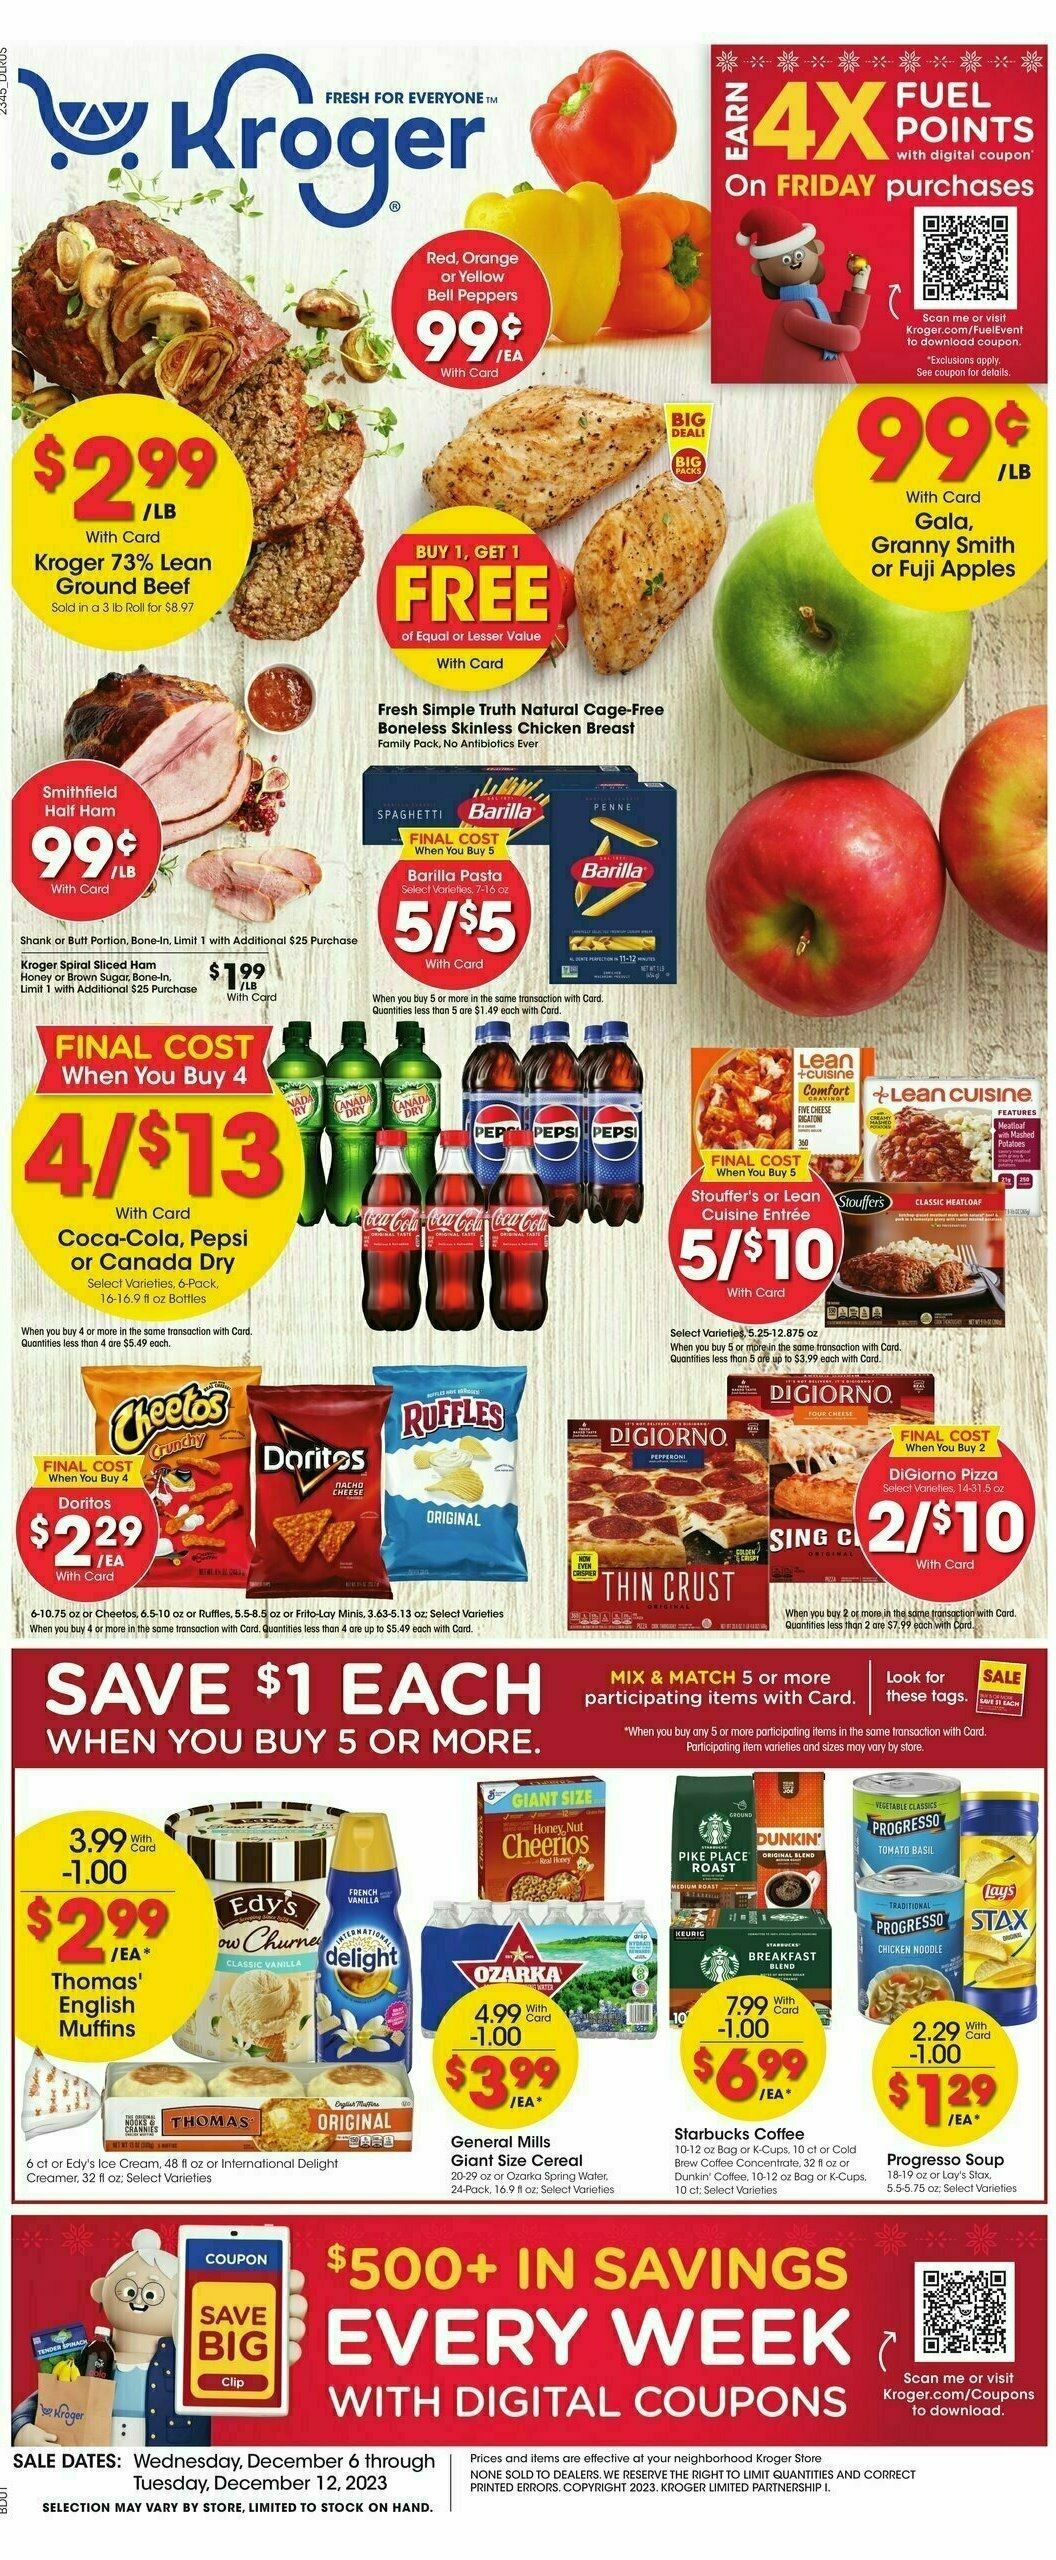 Kroger Weekly Ad from December 6